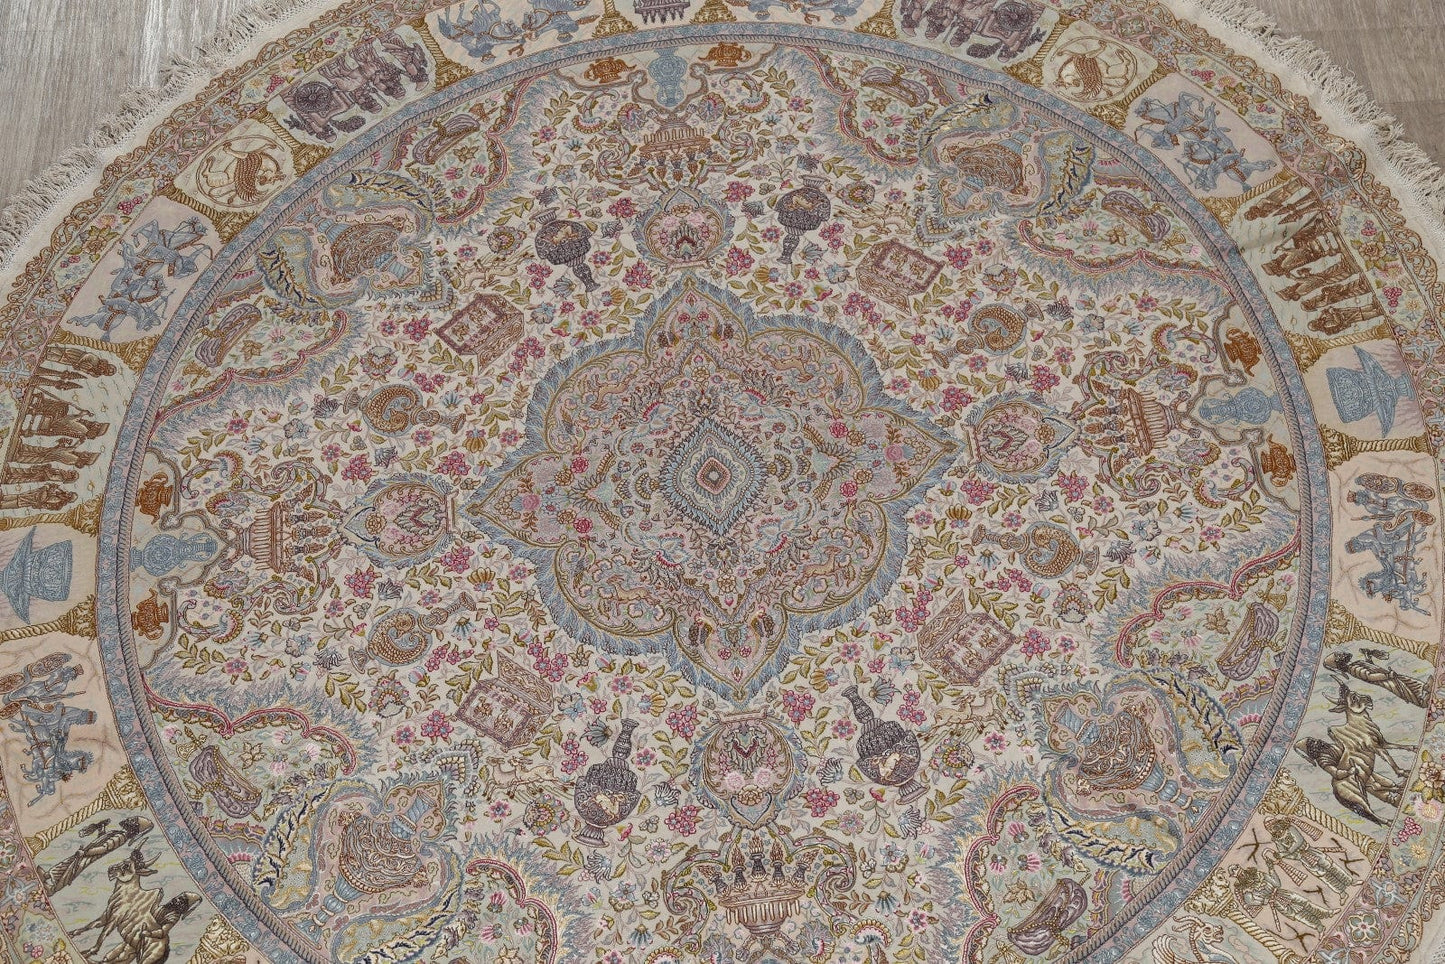 Antique Vegetable Dye Tabriz Persian Hand-Knotted 8x8 Wool Silk Round Rug